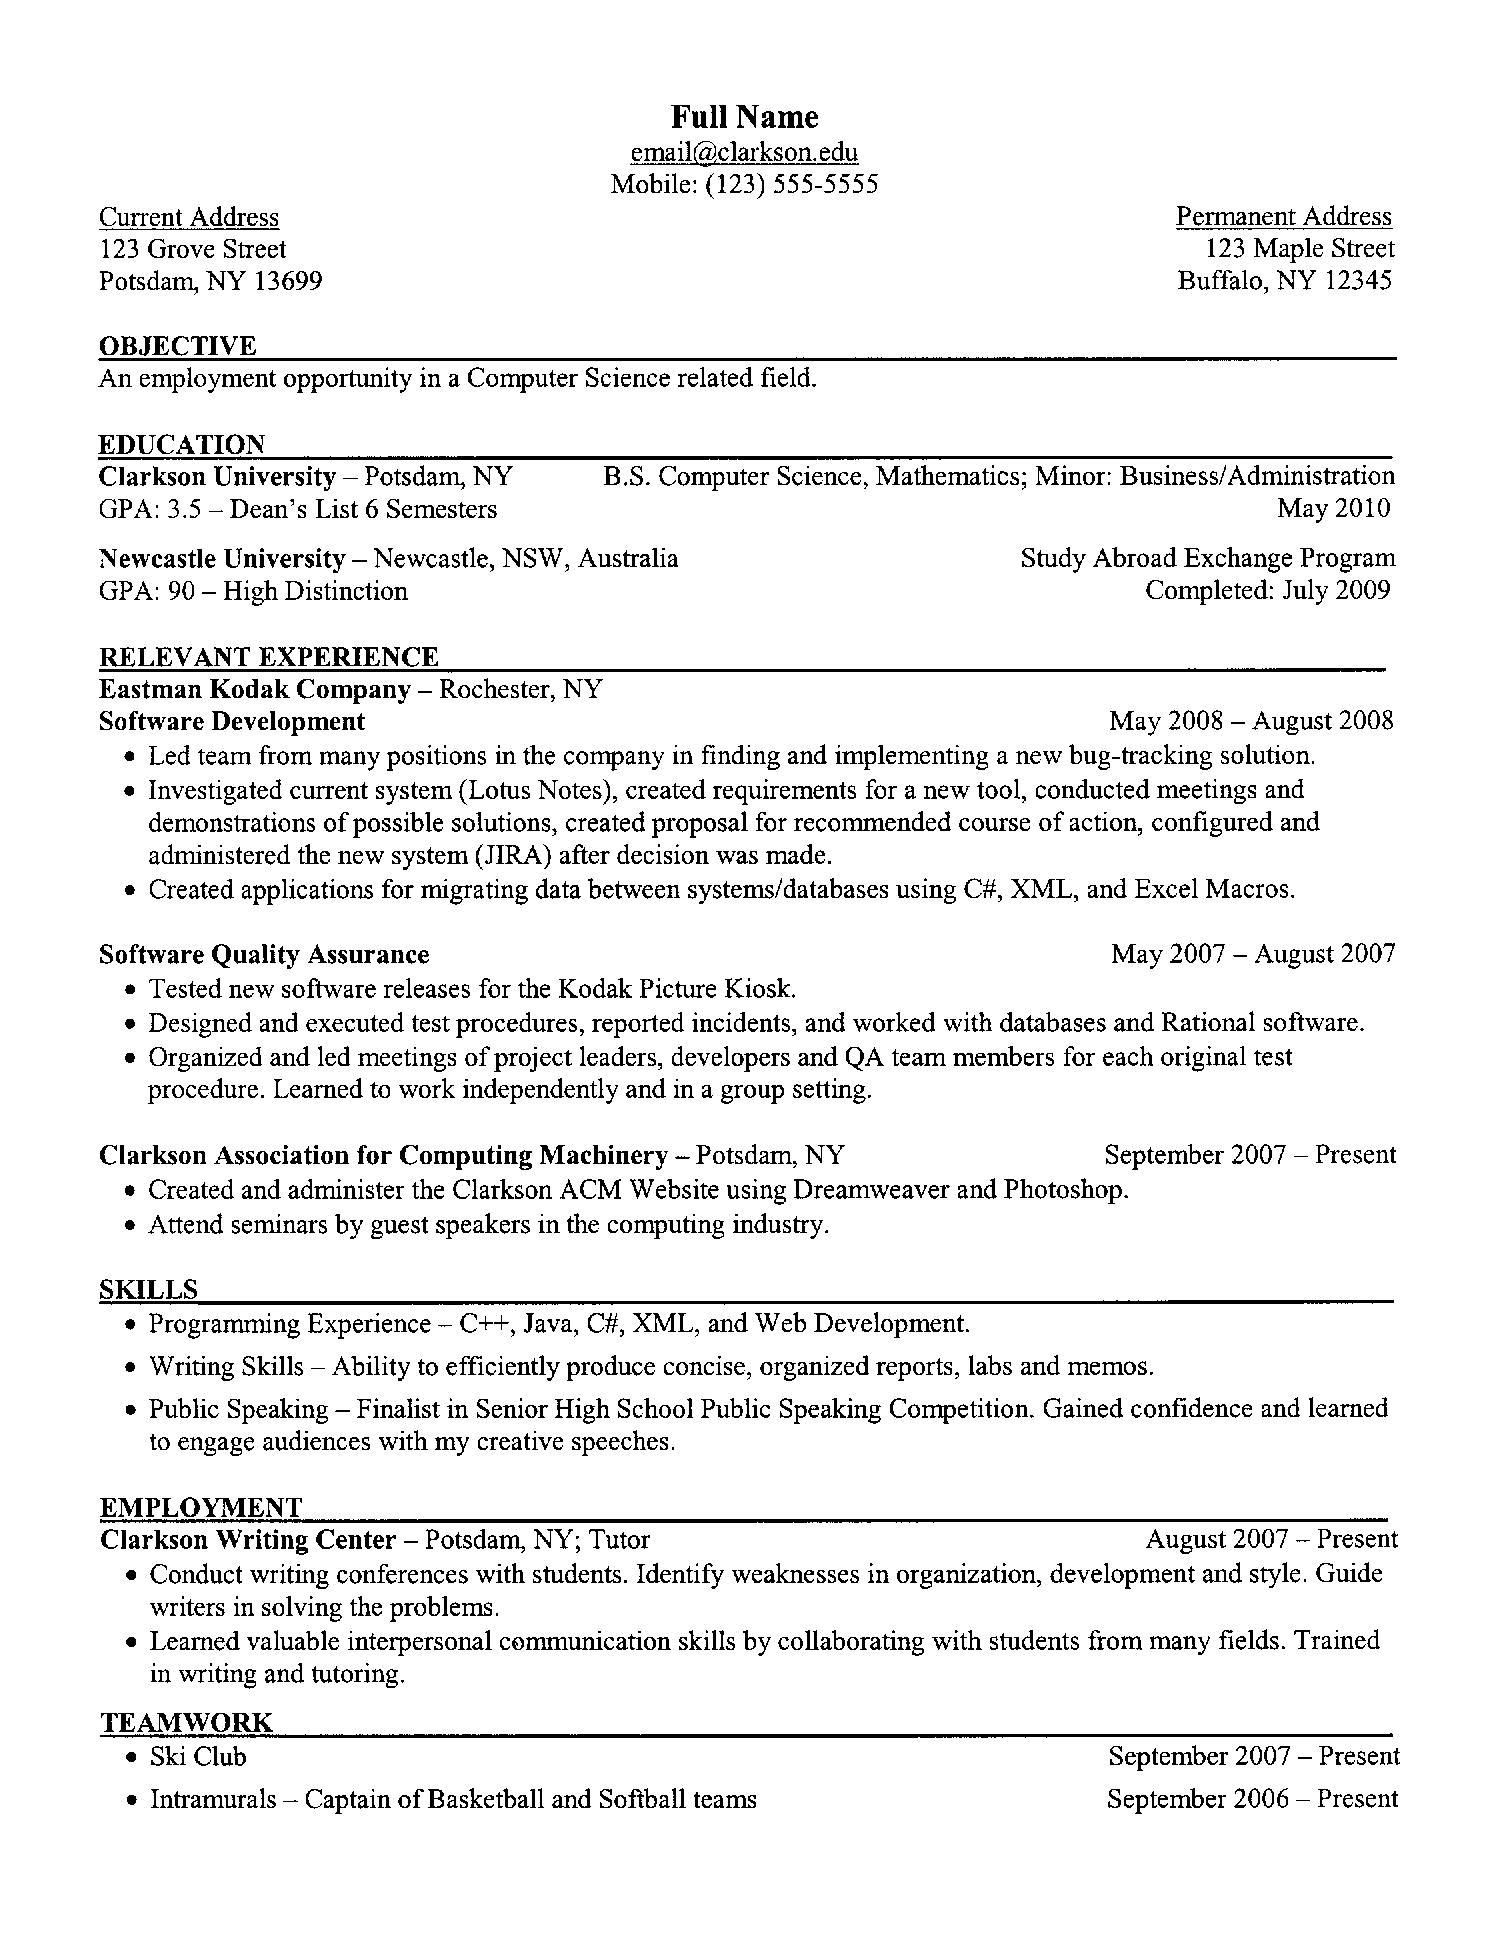 Sample Resume for Ms In Cs Computer Science Resume Example Student Resume Template, Resume …